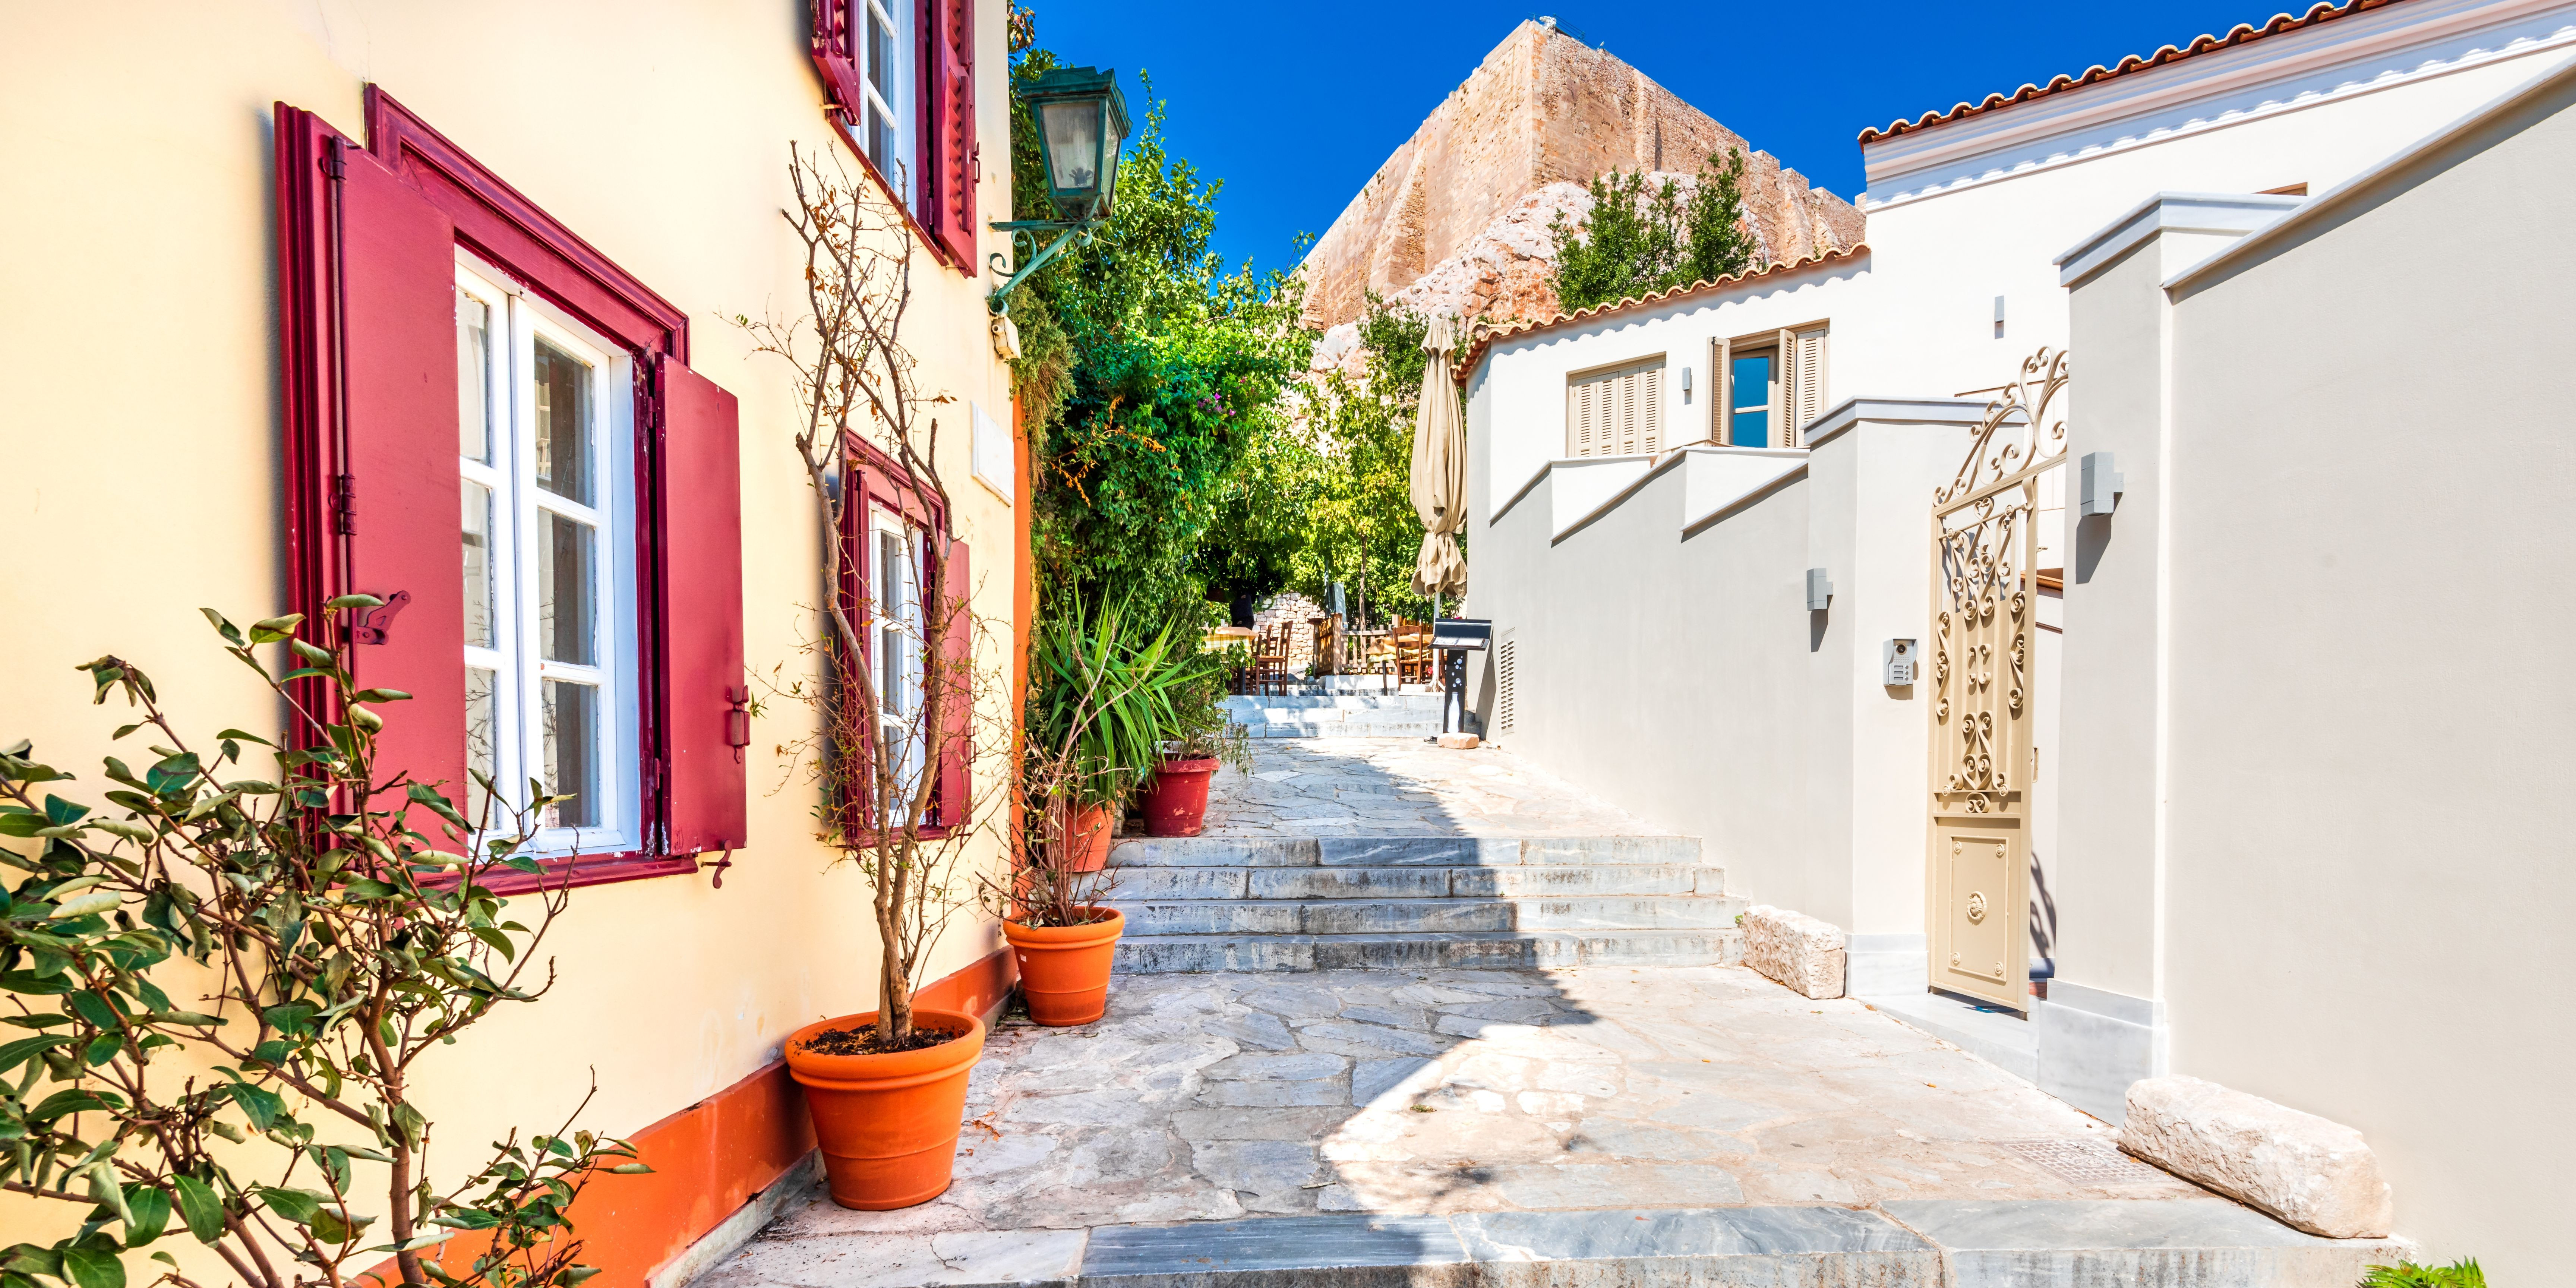 A stone-paved alley in the Plaka neighborhood with colorful houses and potted plants.